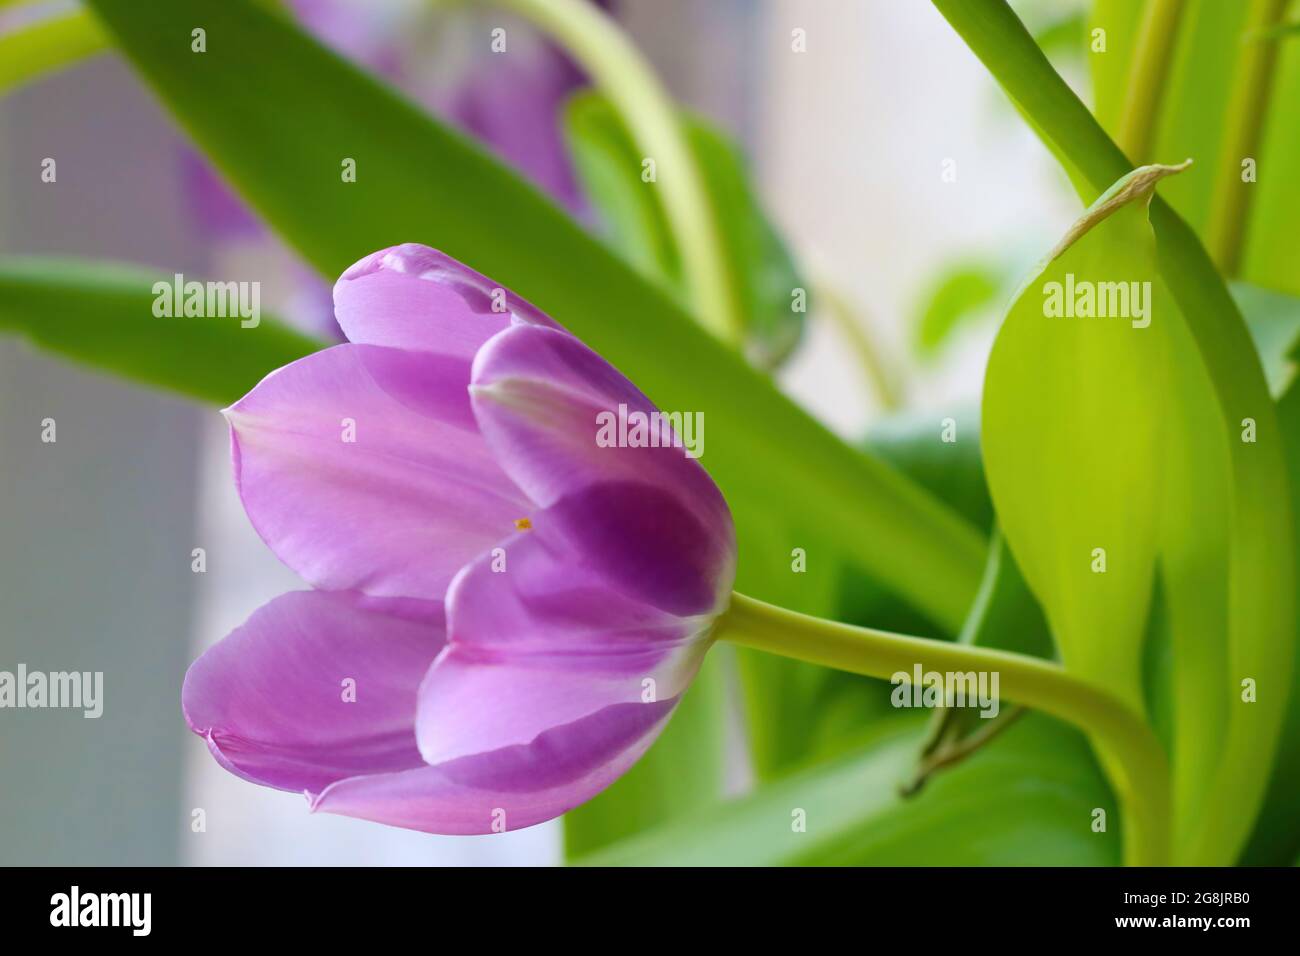 View of the purple flowering tulip close-up. Stock Photo